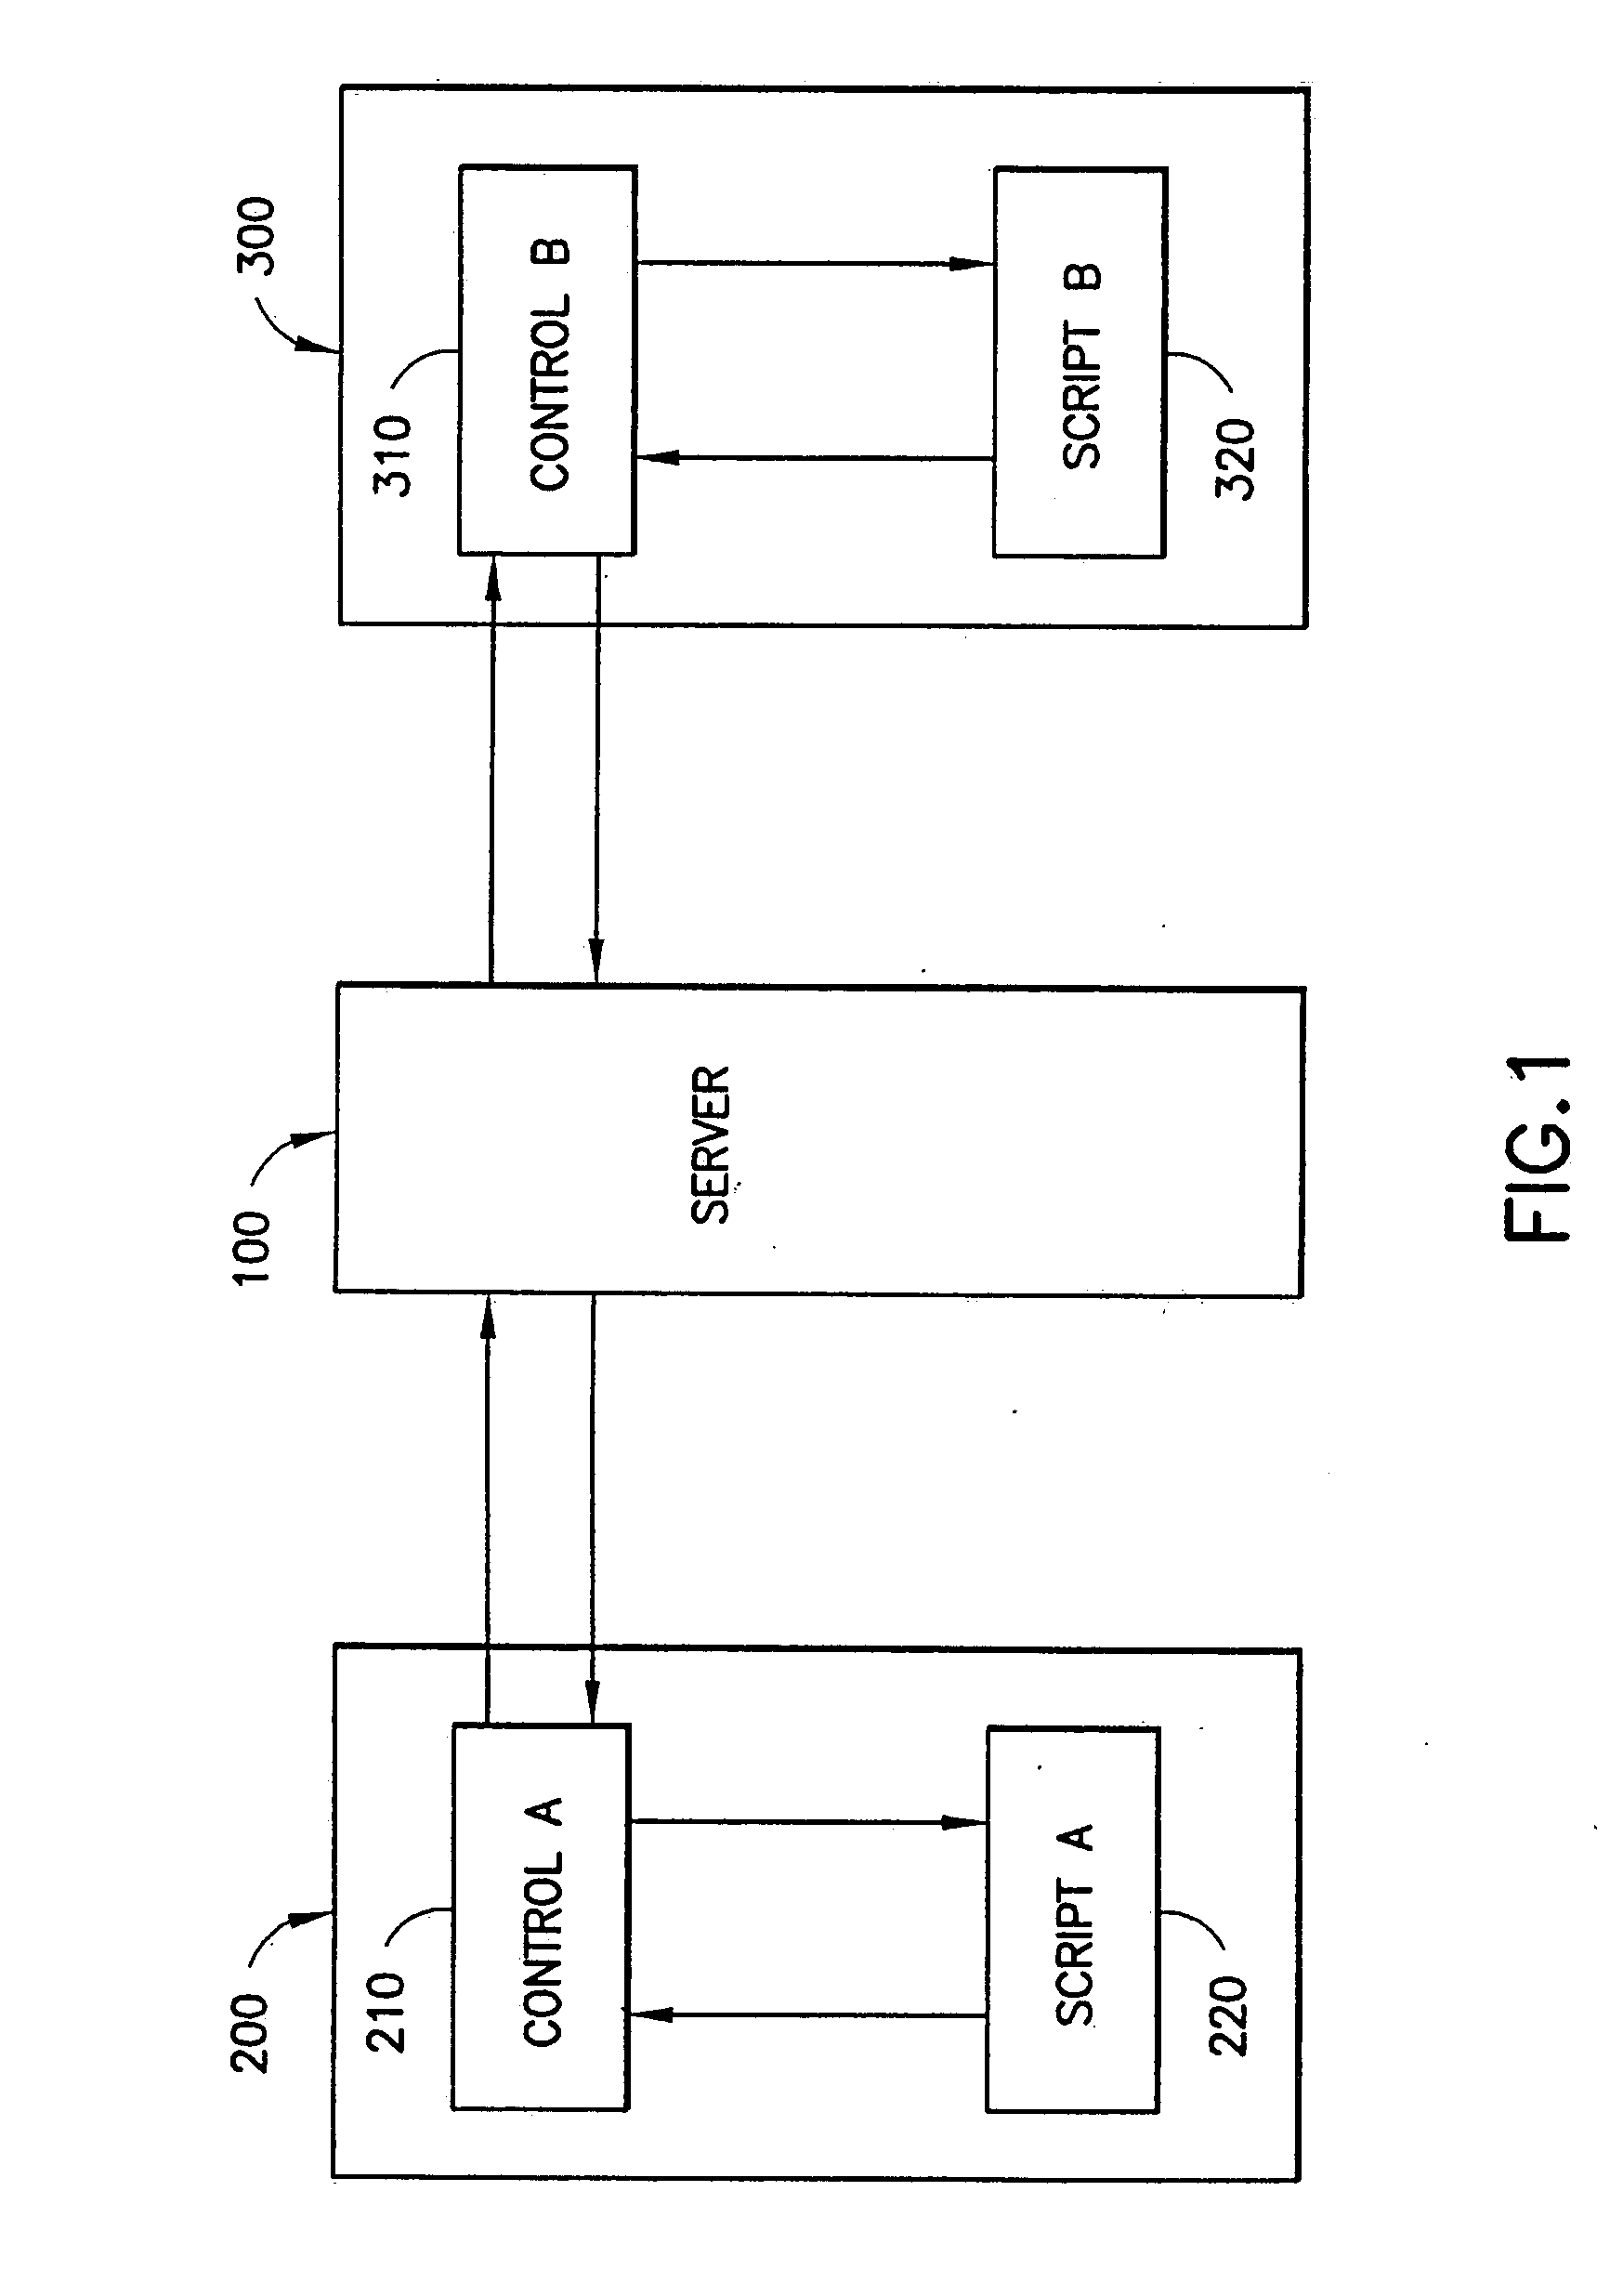 Method and system for enabling a script on a first computer to exchange data with a script on a second computer over a network